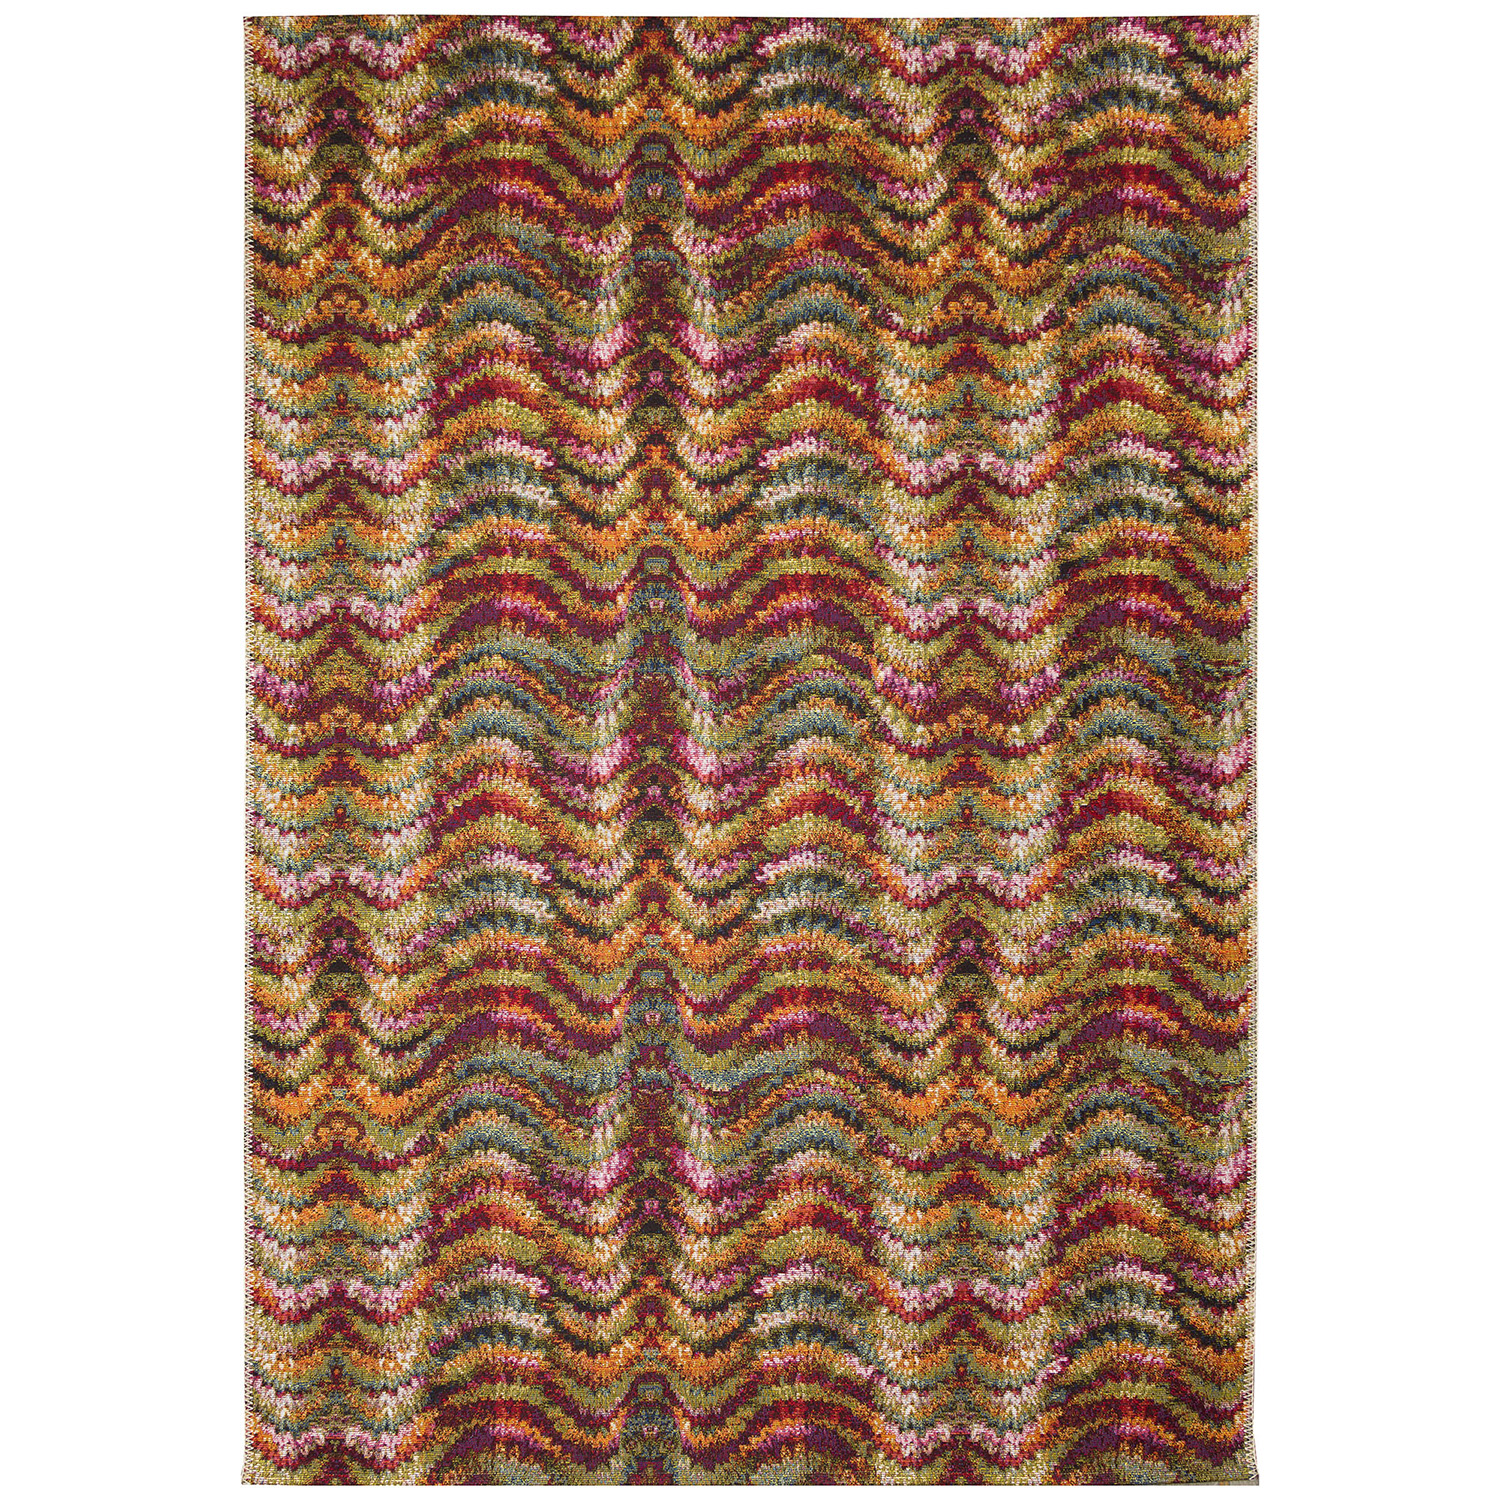 Liora Manne Marina Low Profile  Durable Indoor/Outdoor Woven Rug- Ripple Multi  Product Image